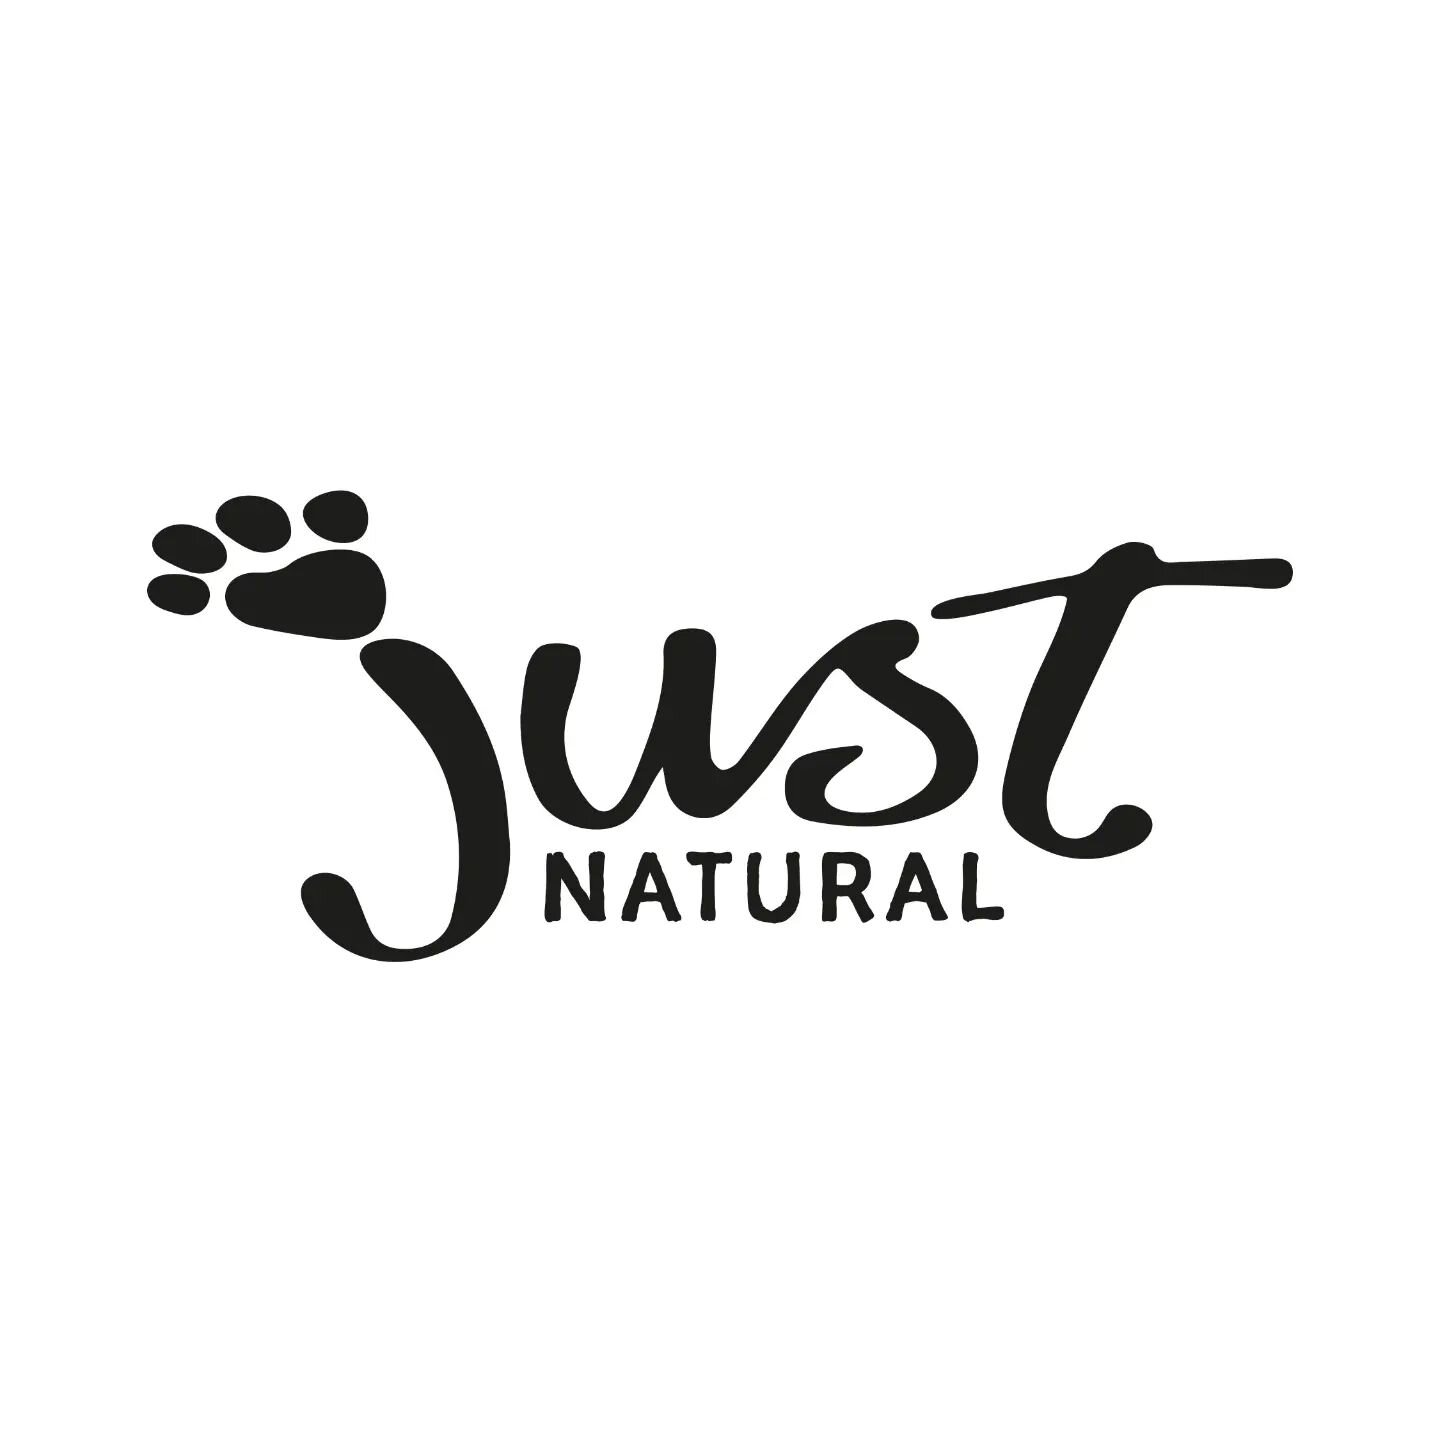 We are proud to assist @justnaturalrawuk when it comes to creating a brand. 🤝

From web design, photography, marketing, print - the list goes on!

Who knew tripe could look so glamorous? 🐶 

#designagency#graphicdesign#photography#marketing#glasgow